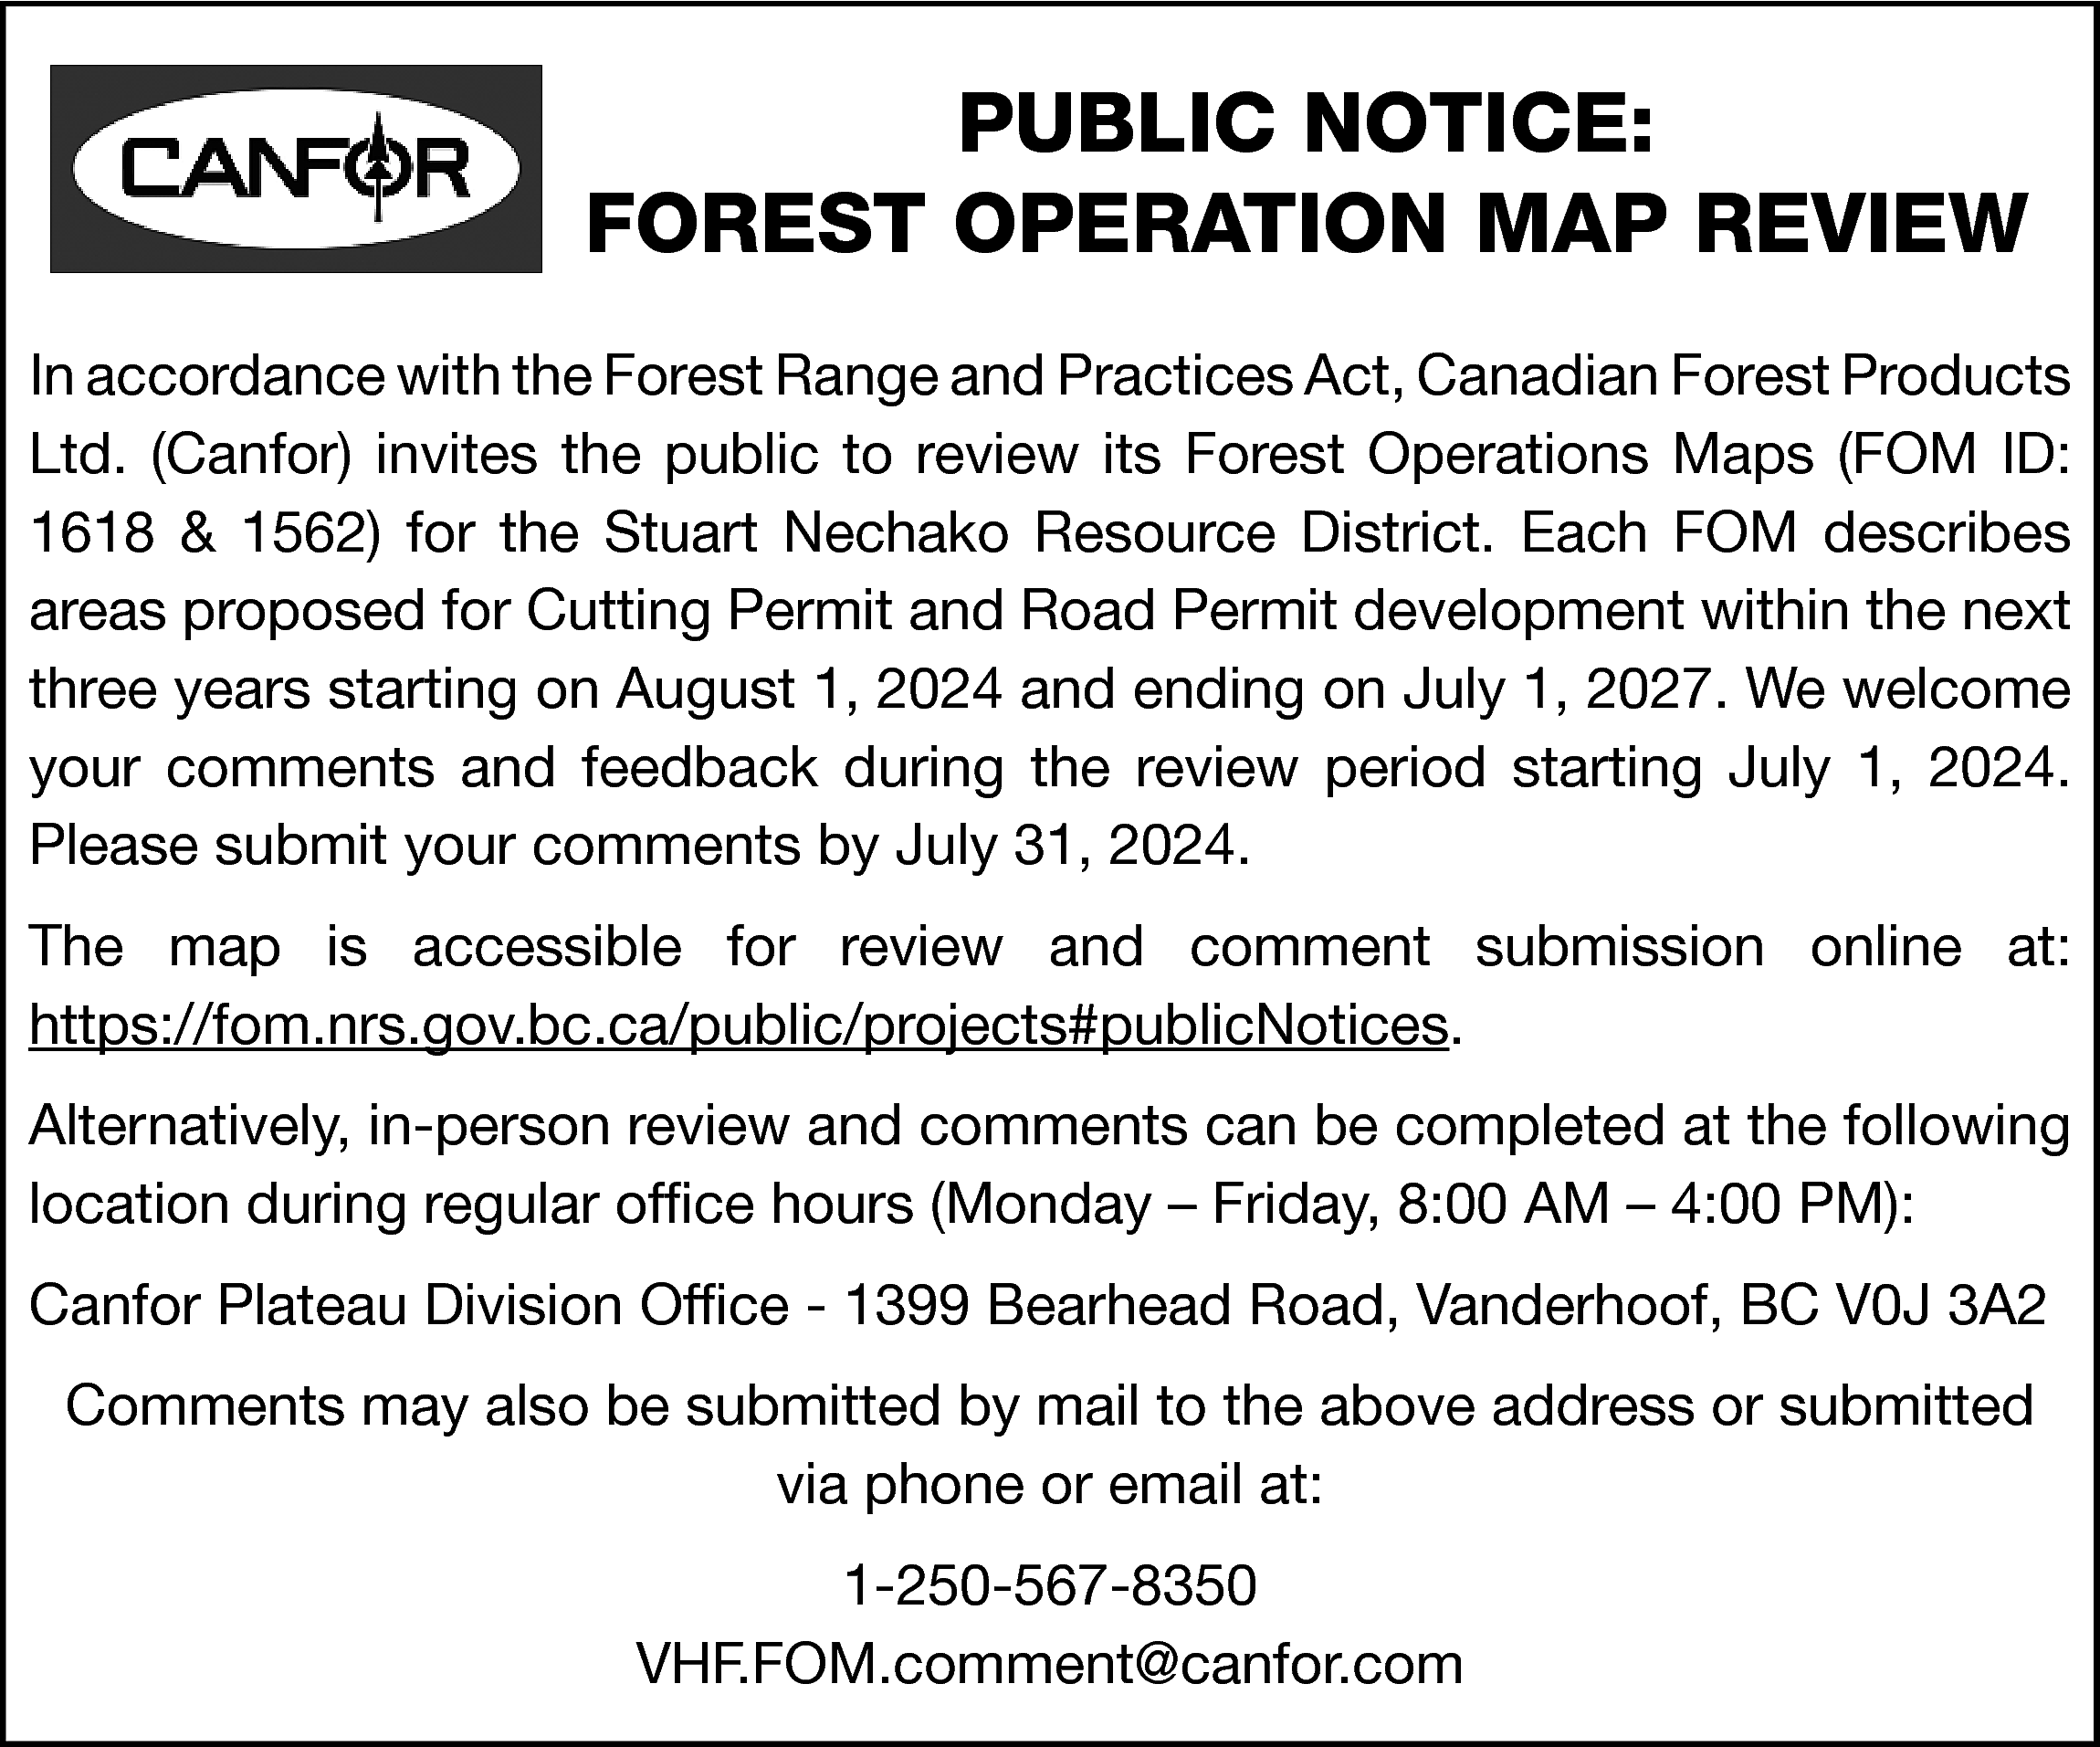 PUBLIC NOTICE: <br>FOREST OPERATION MAP  PUBLIC NOTICE:  FOREST OPERATION MAP REVIEW  In accordance with the Forest Range and Practices Act, Canadian Forest Products  Ltd. (Canfor) invites the public to review its Forest Operations Maps (FOM ID:  1618 & 1562) for the Stuart Nechako Resource District. Each FOM describes  areas proposed for Cutting Permit and Road Permit development within the next  three years starting on August 1, 2024 and ending on July 1, 2027. We welcome  your comments and feedback during the review period starting July 1, 2024.  Please submit your comments by July 31, 2024.  The map is accessible for review and comment submission online at:  https://fom.nrs.gov.bc.ca/public/projects#publicNotices.  Alternatively, in-person review and comments can be completed at the following  location during regular office hours (Monday – Friday, 8:00 AM – 4:00 PM):  Canfor Plateau Division Office - 1399 Bearhead Road, Vanderhoof, BC V0J 3A2  Comments may also be submitted by mail to the above address or submitted  via phone or email at:  1-250-567-8350  VHF.FOM.comment@canfor.com    